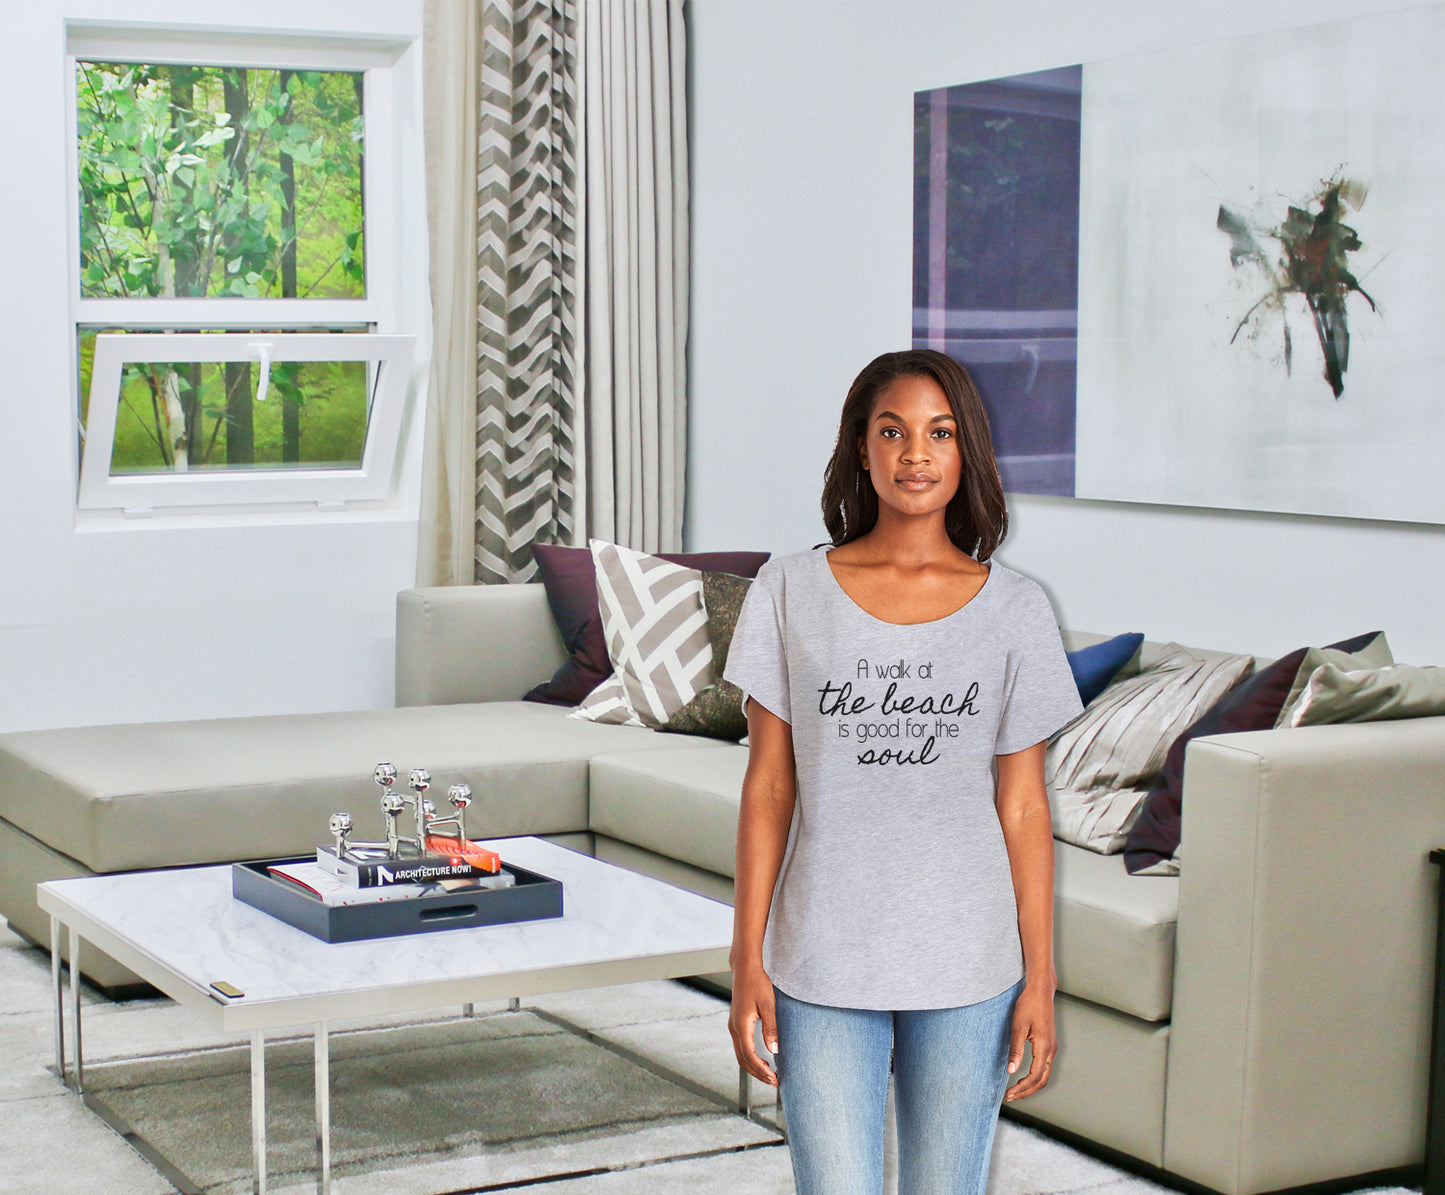 A Walk At The Beach Is Good For The Soul Ladies Tee Shirt - In Grey & White